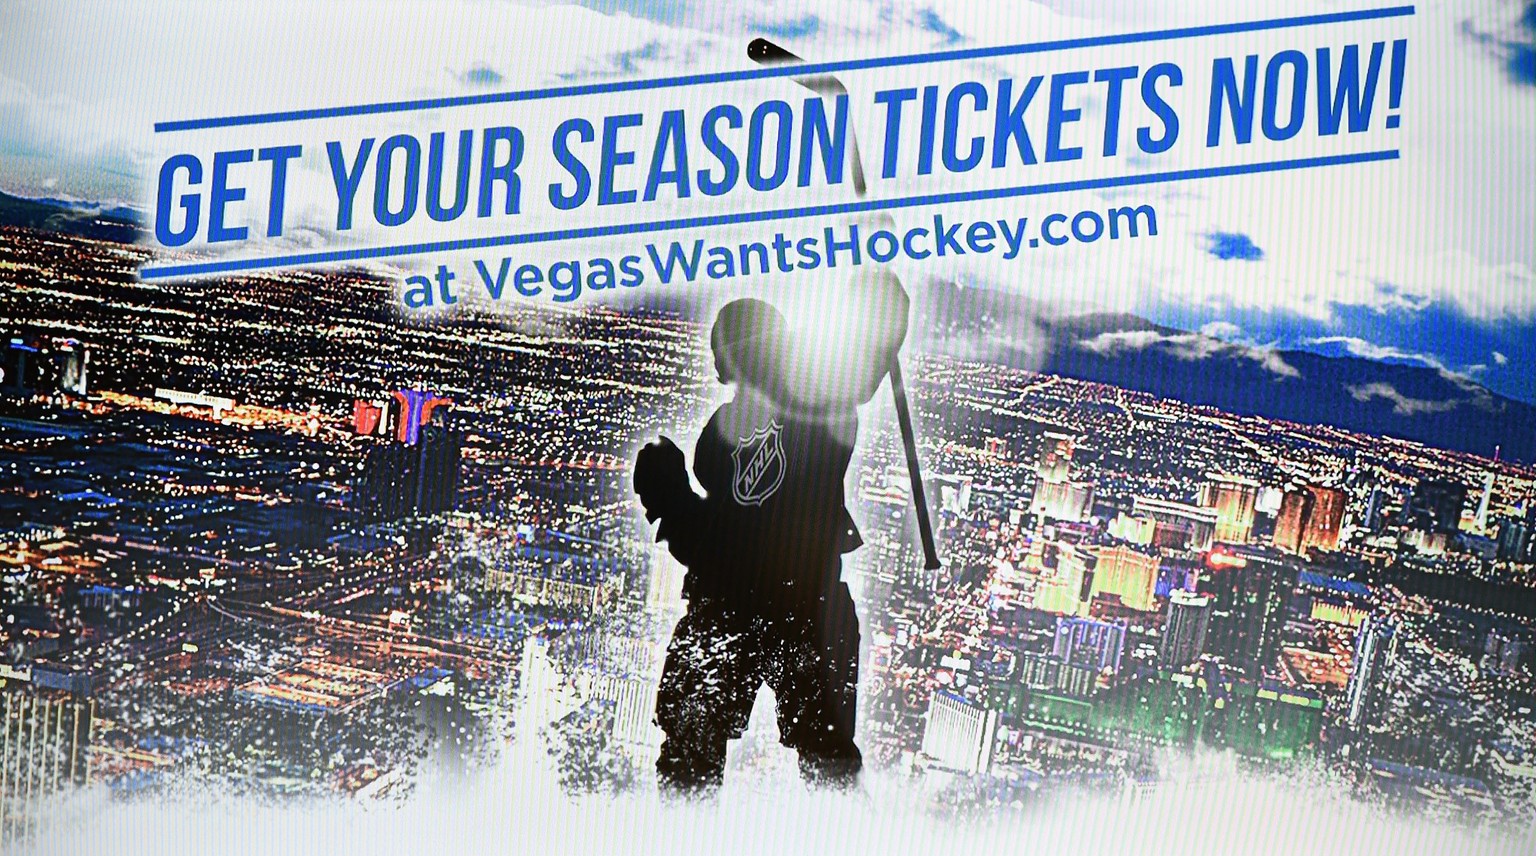 LAS VEGAS, NV - FEBRUARY 10: A television shows an advertisement from Hockey Vision Las Vegas during a news conference at the MGM Grand Hotel &amp; Casino announcing the launch of a season ticket driv ...